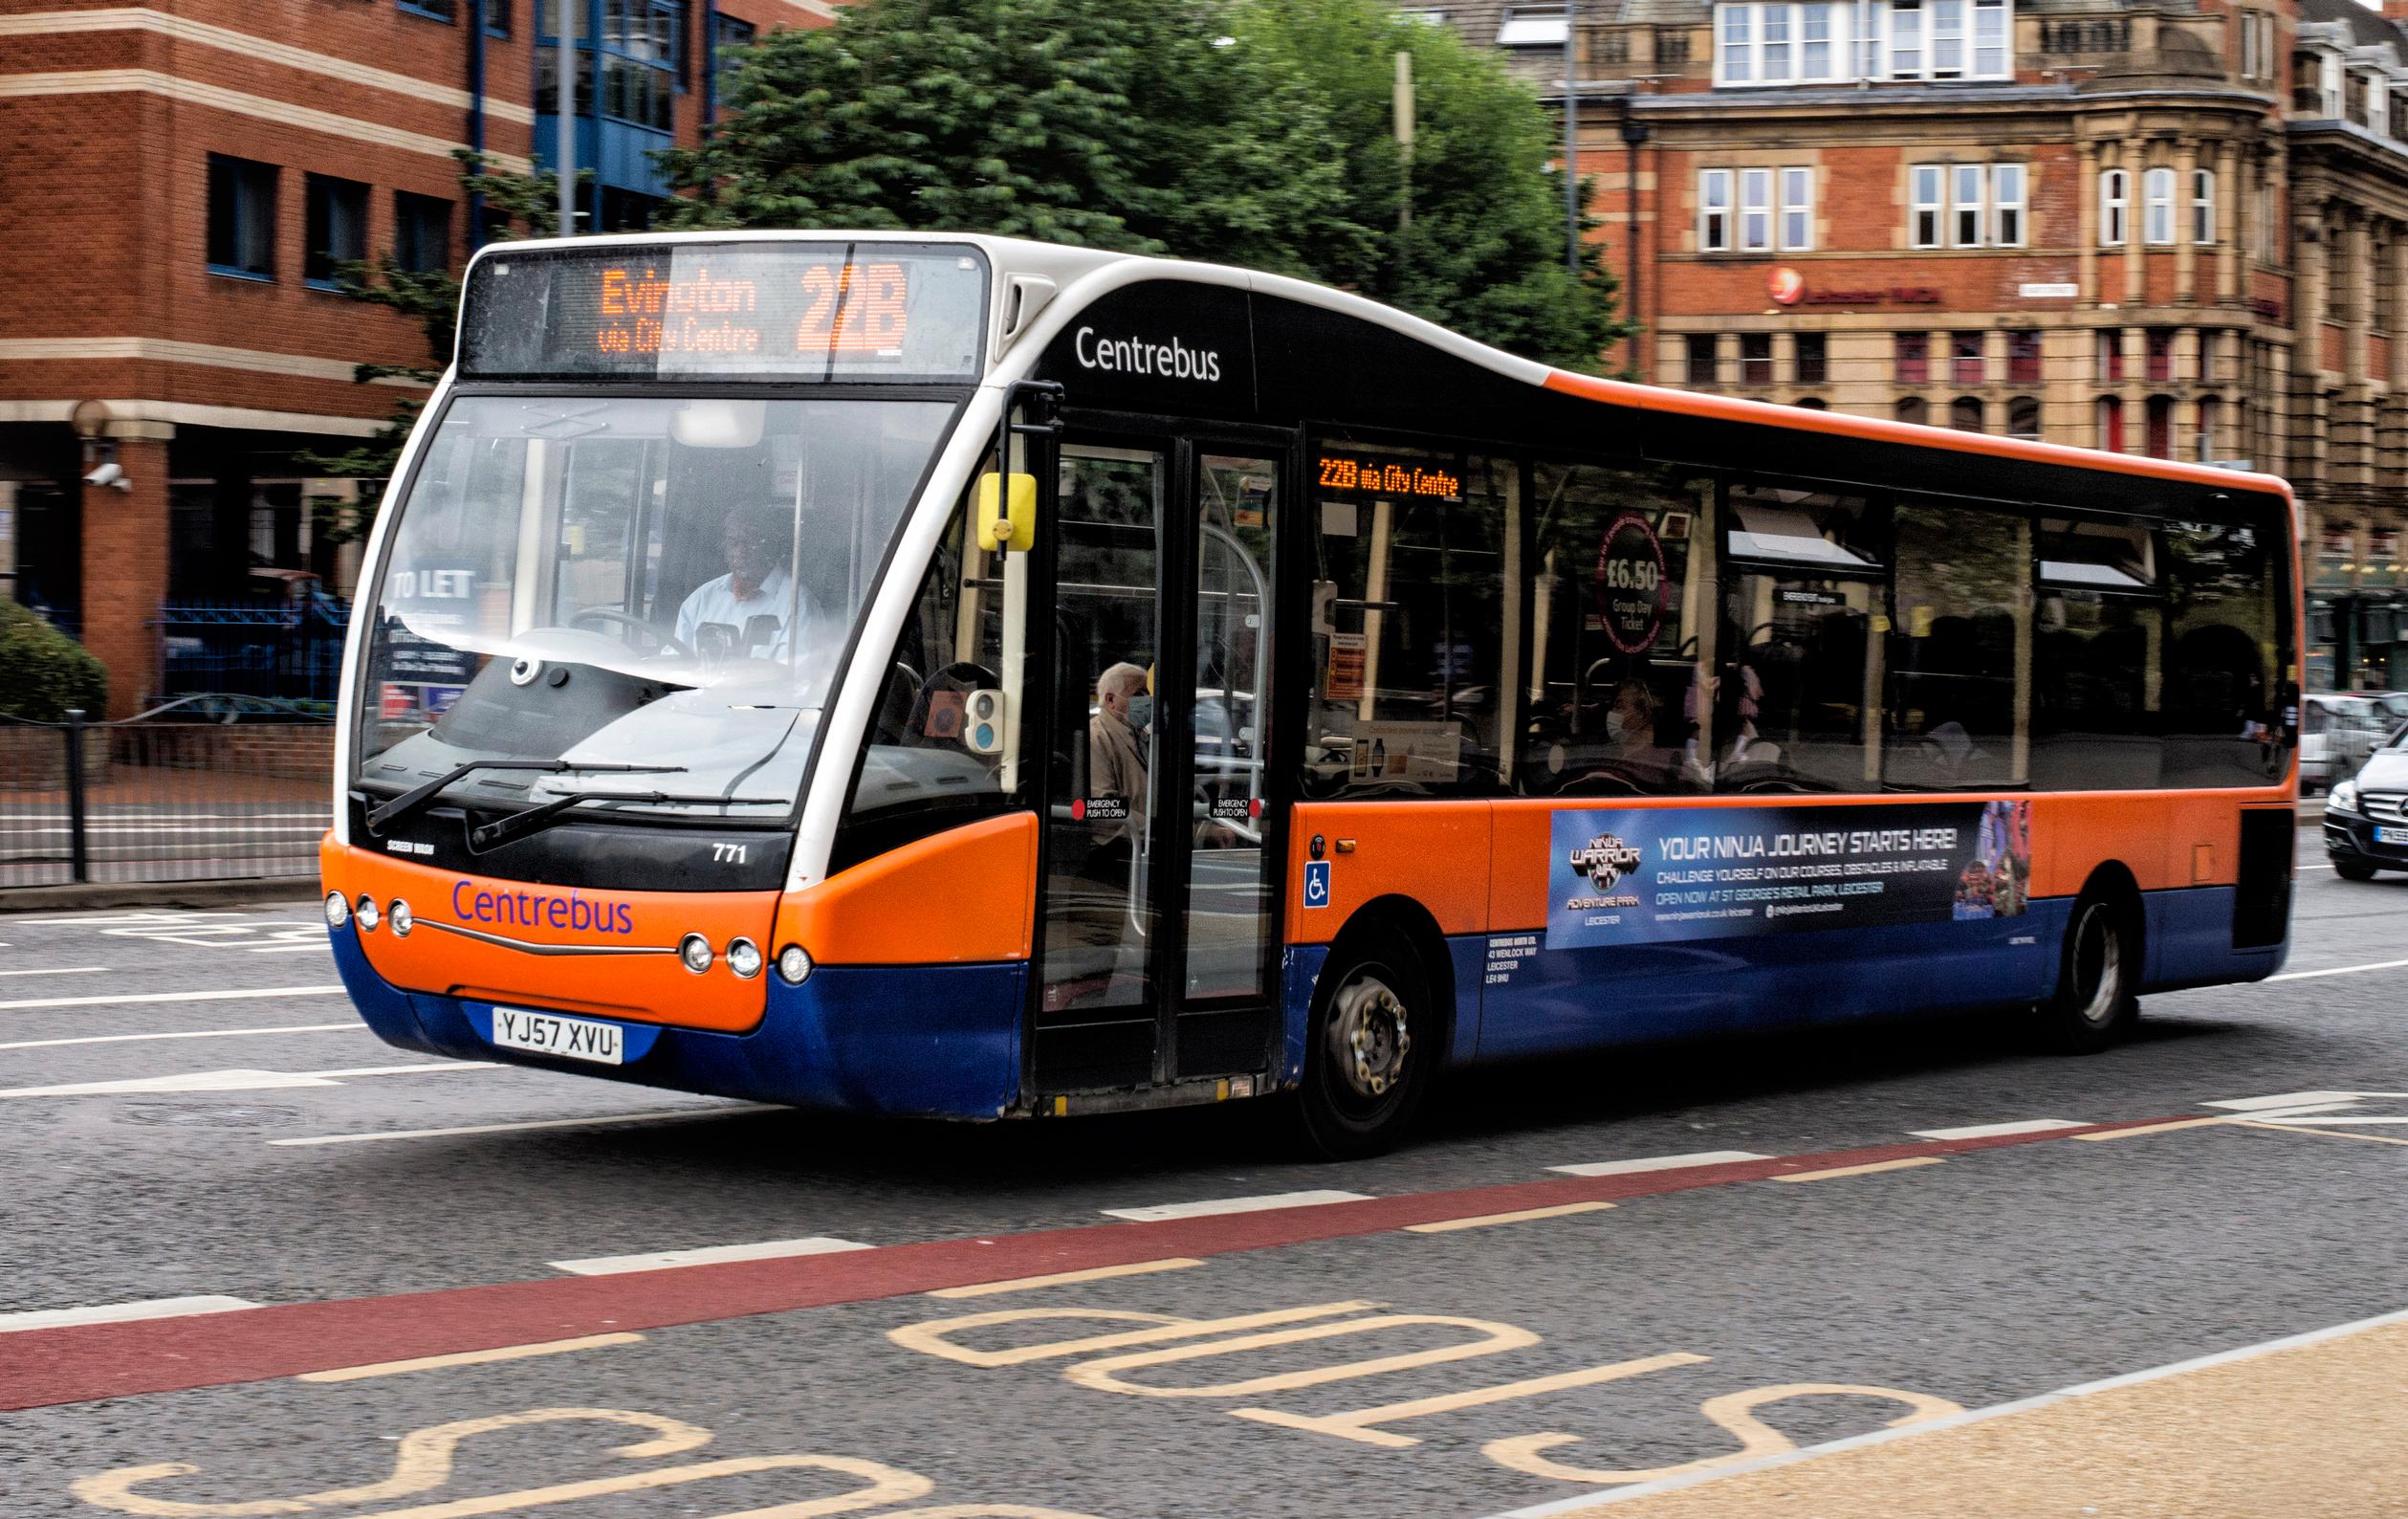 Centrebus are among the operators hindered by driver shortages